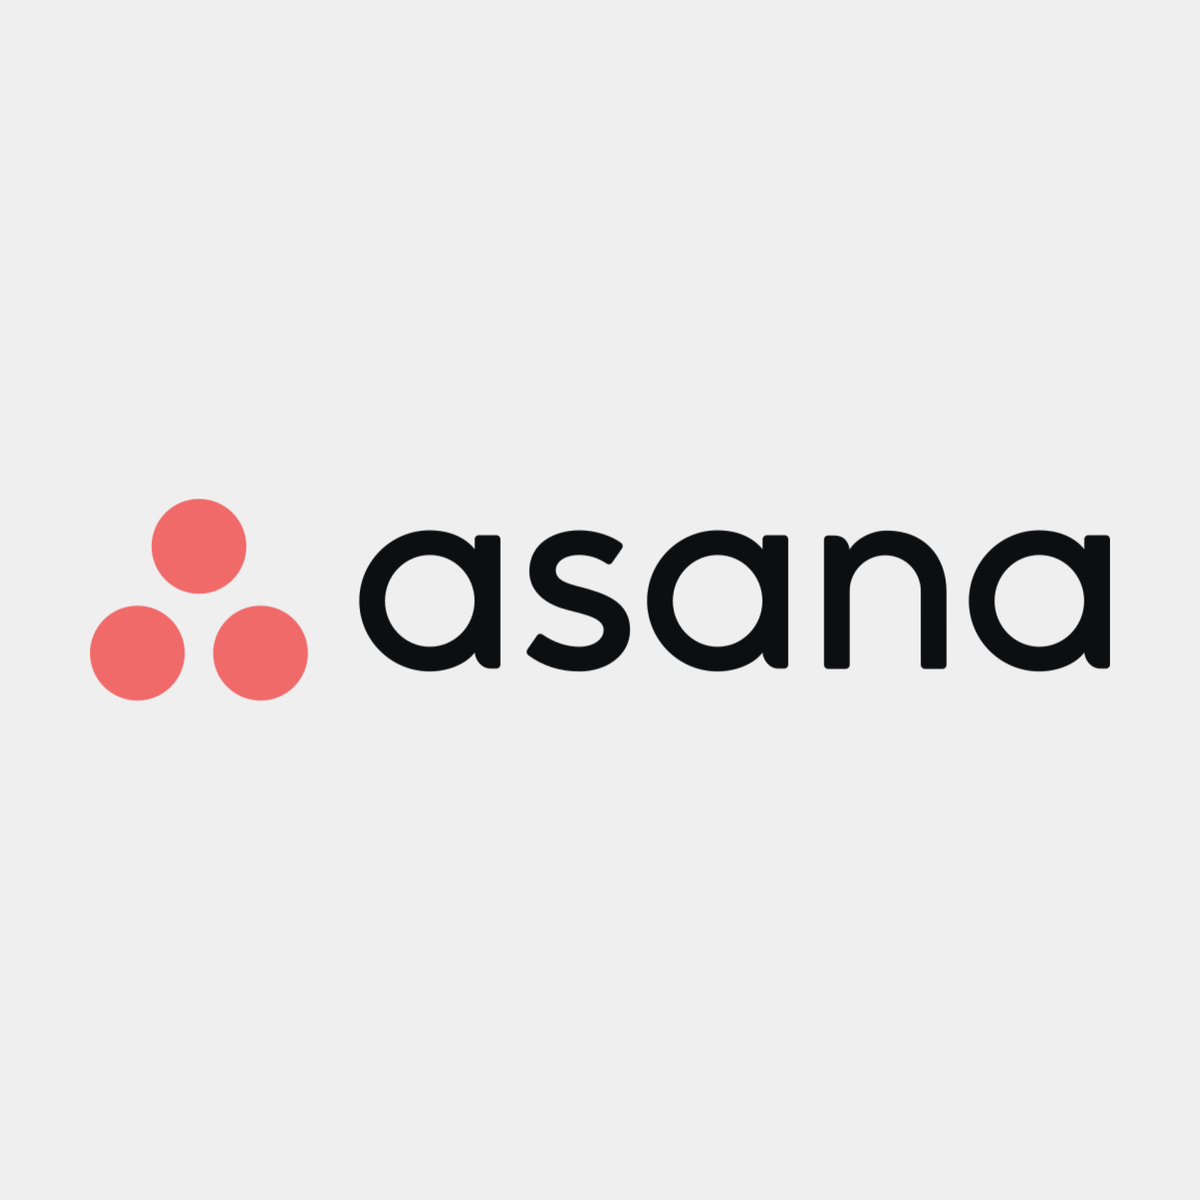 Need Contains only option for multi-select fields in Rules - Product  Feedback - Asana Forum